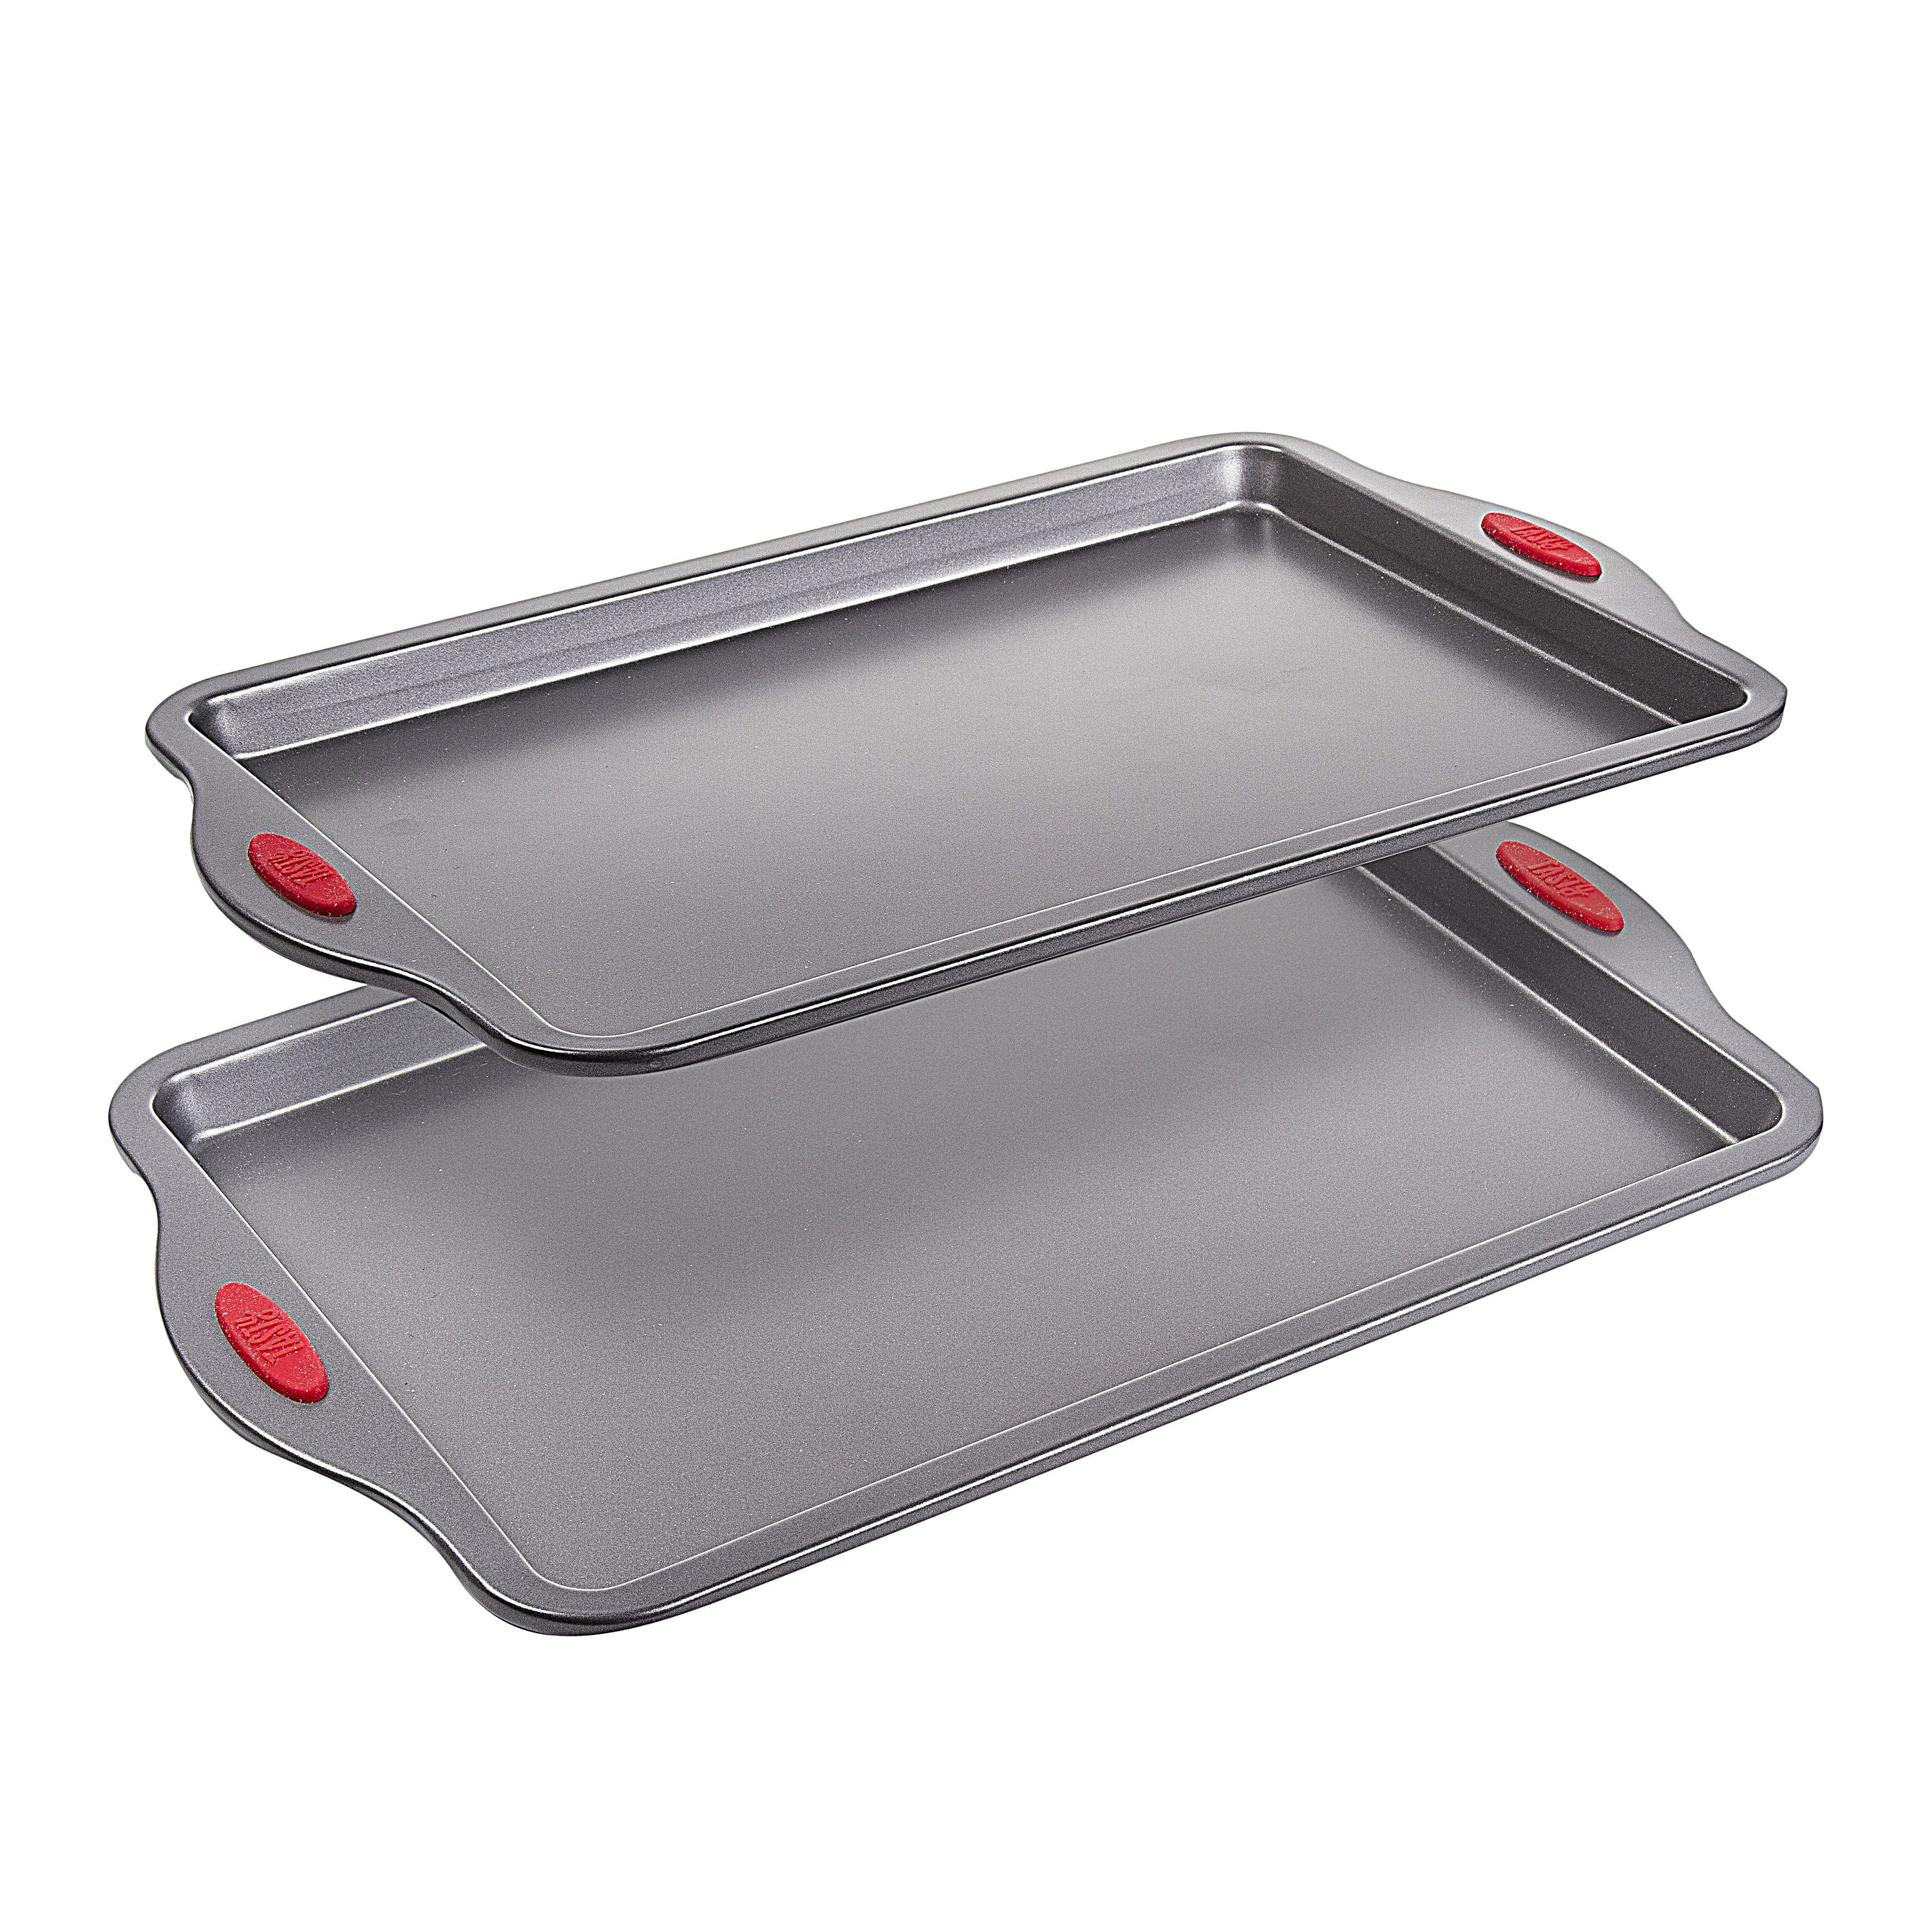 Tasty 17 x 11 Non-Stick Cookie Sheet with Red Silicone Handles - Set of 2  